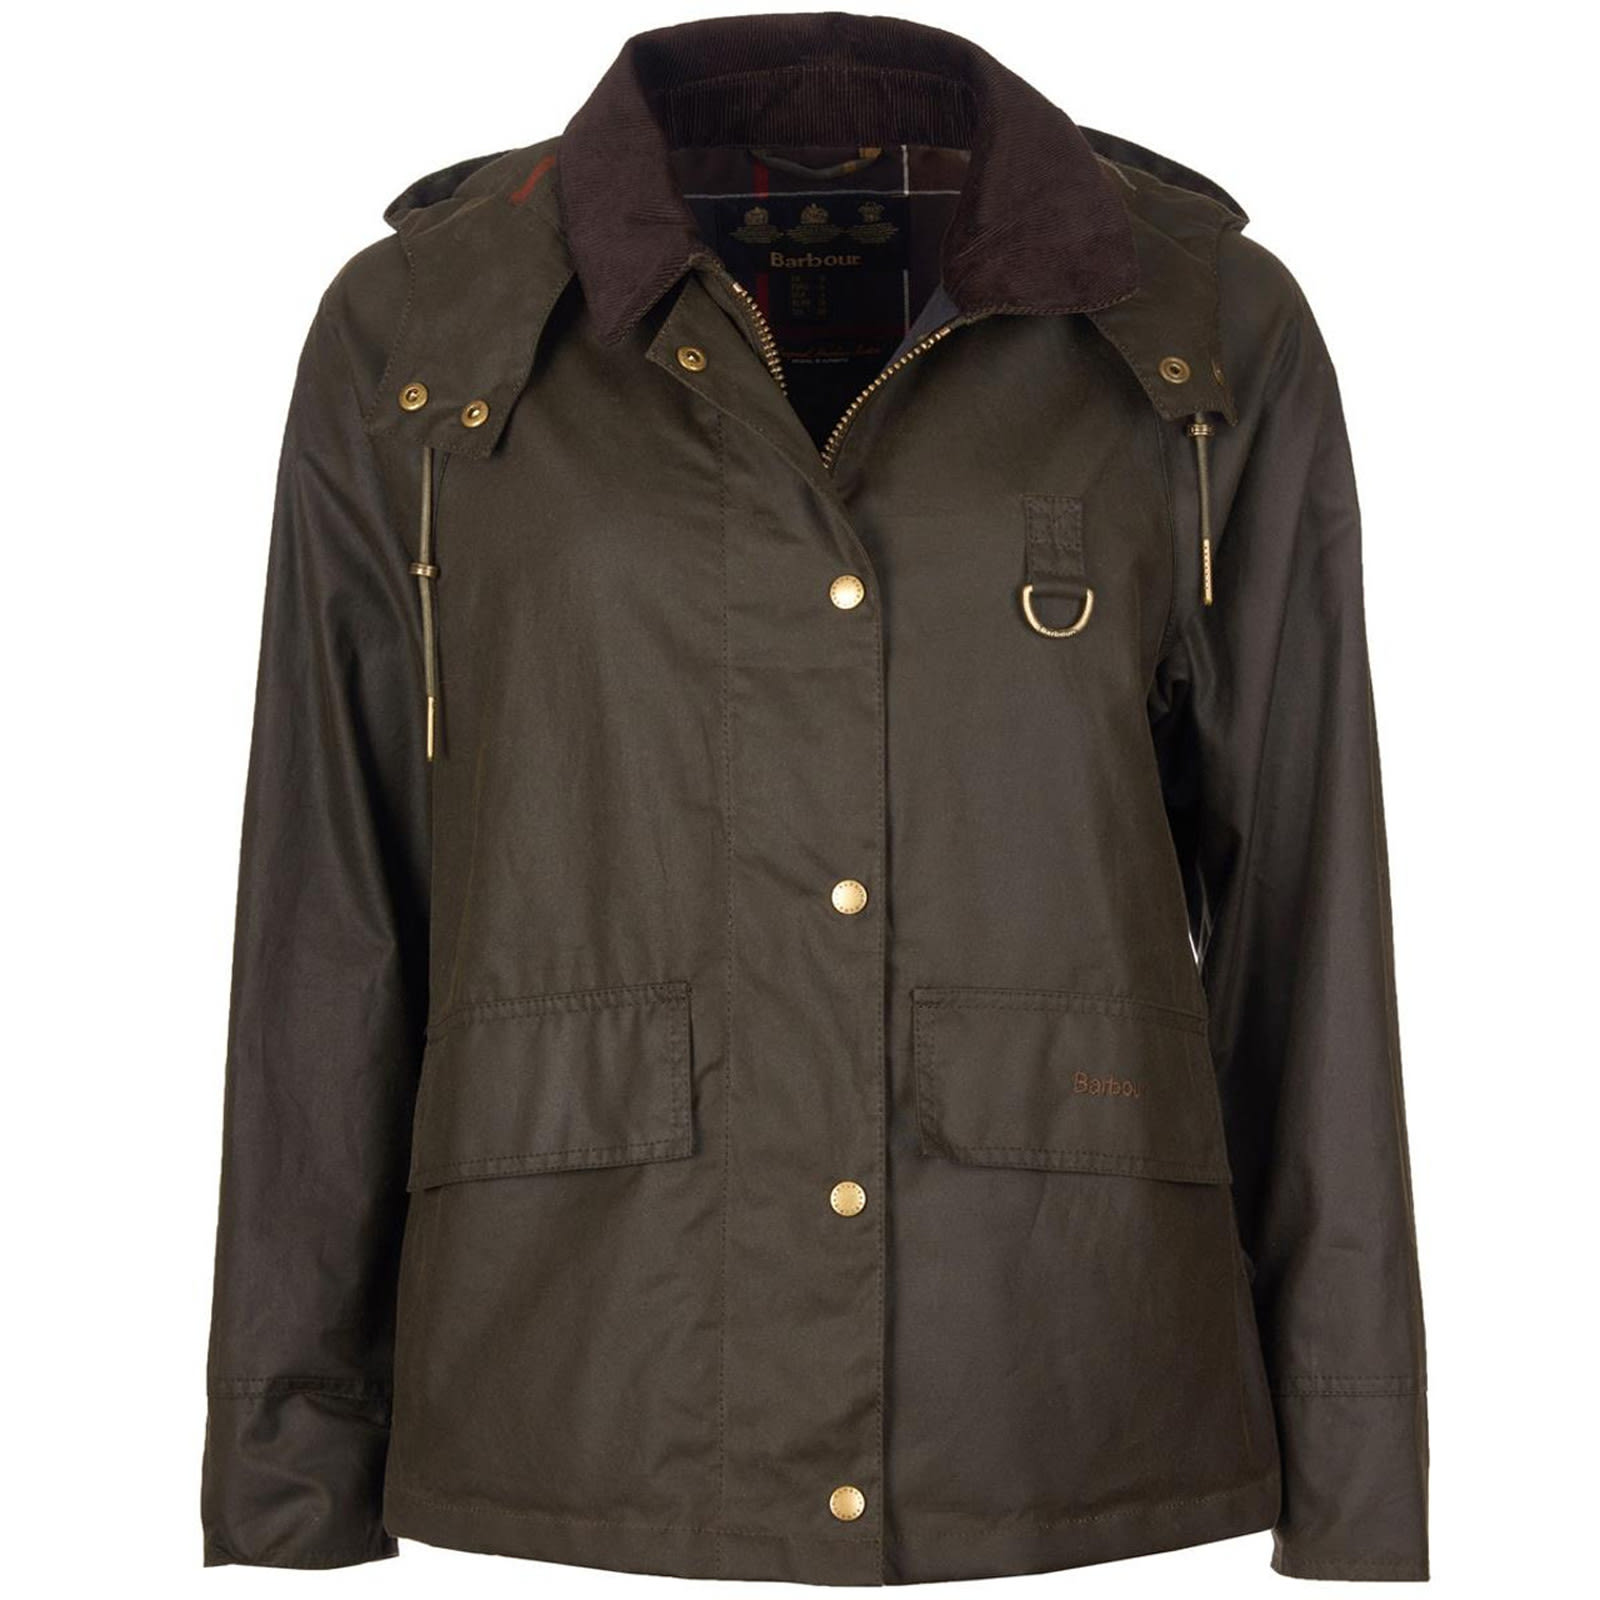 Barbour Giacca In Cotone Cerato Barbour Avon Lwx1081ol71